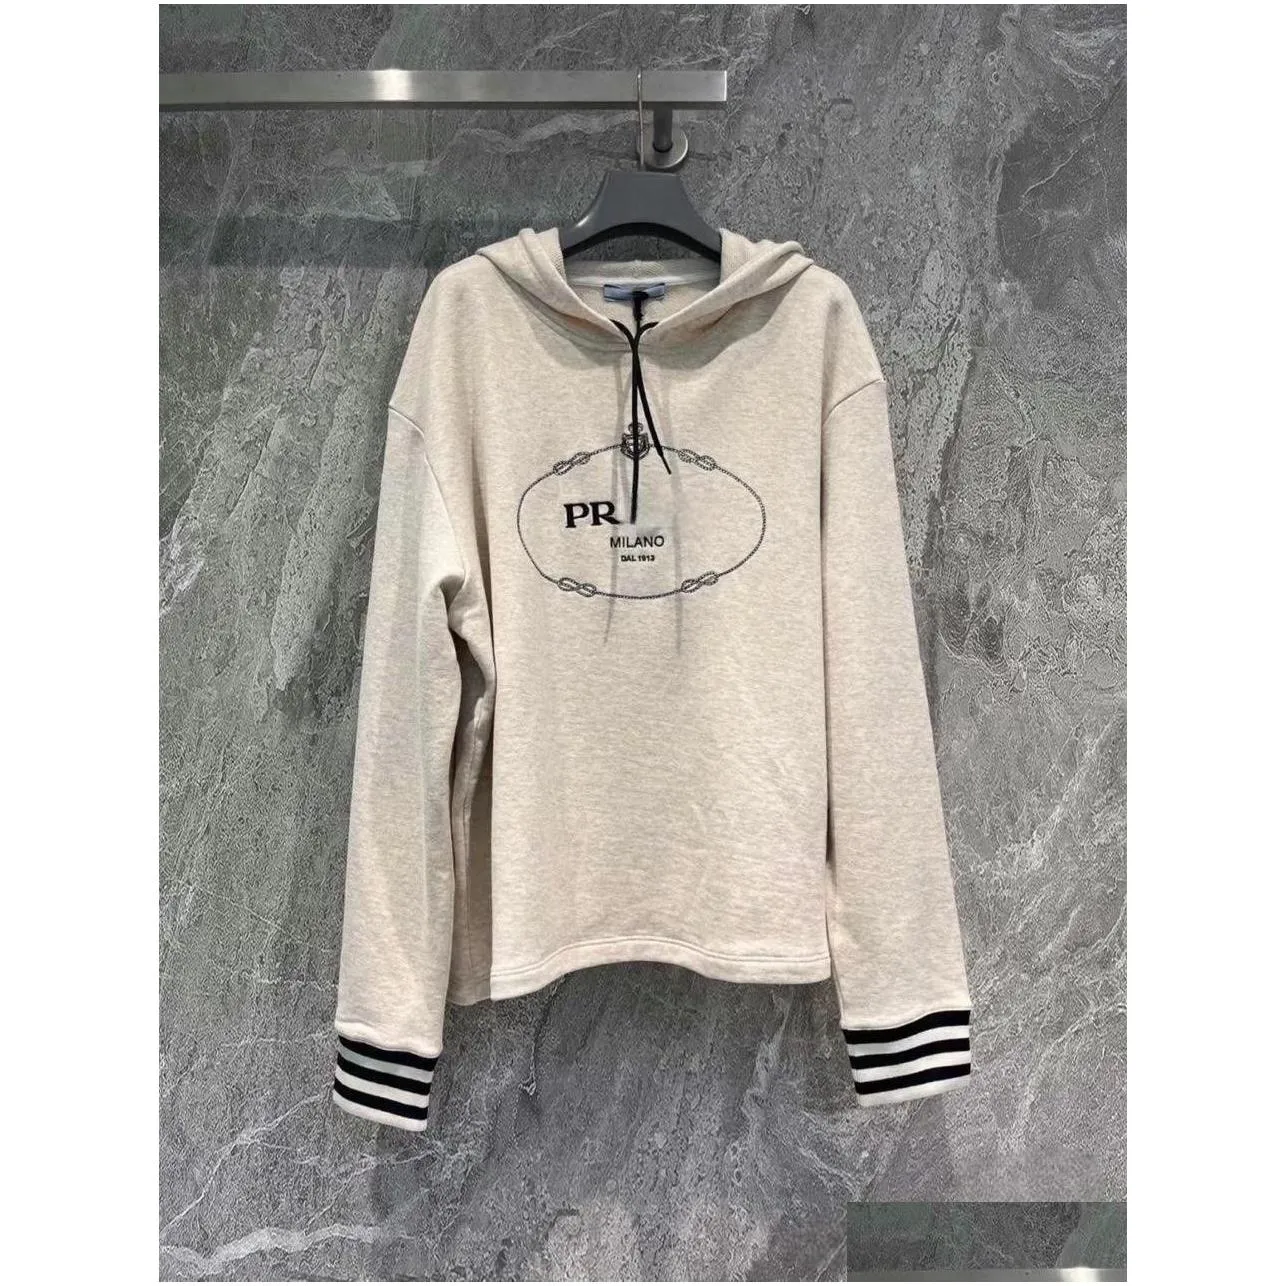 Designer Womens Hoodies Letter Logo Embroidery Sweatshirts Printed Letters Casual Loose Hooded Fleece Cotton Mens Sweater Cuff thread Jumper Tops